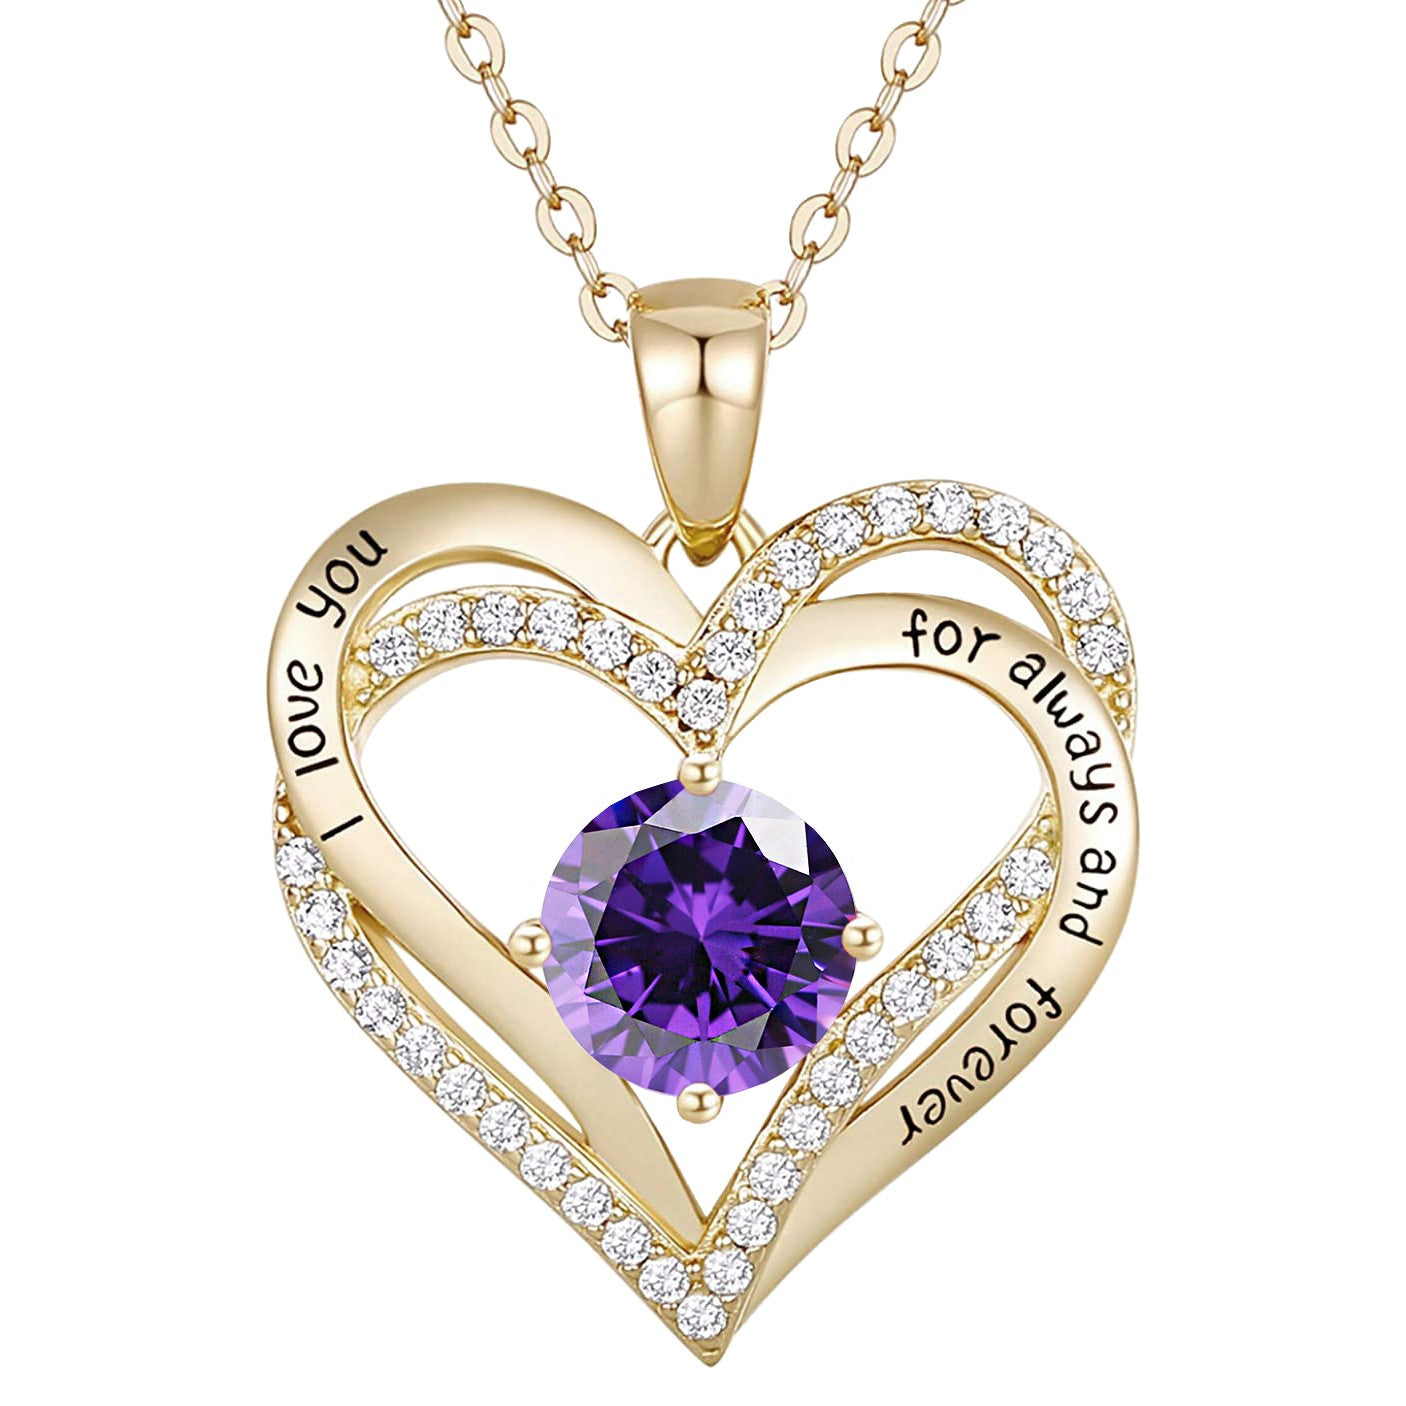 14k Gold Plated Heart ''i Love You'' Pendant With Amathyst Stone